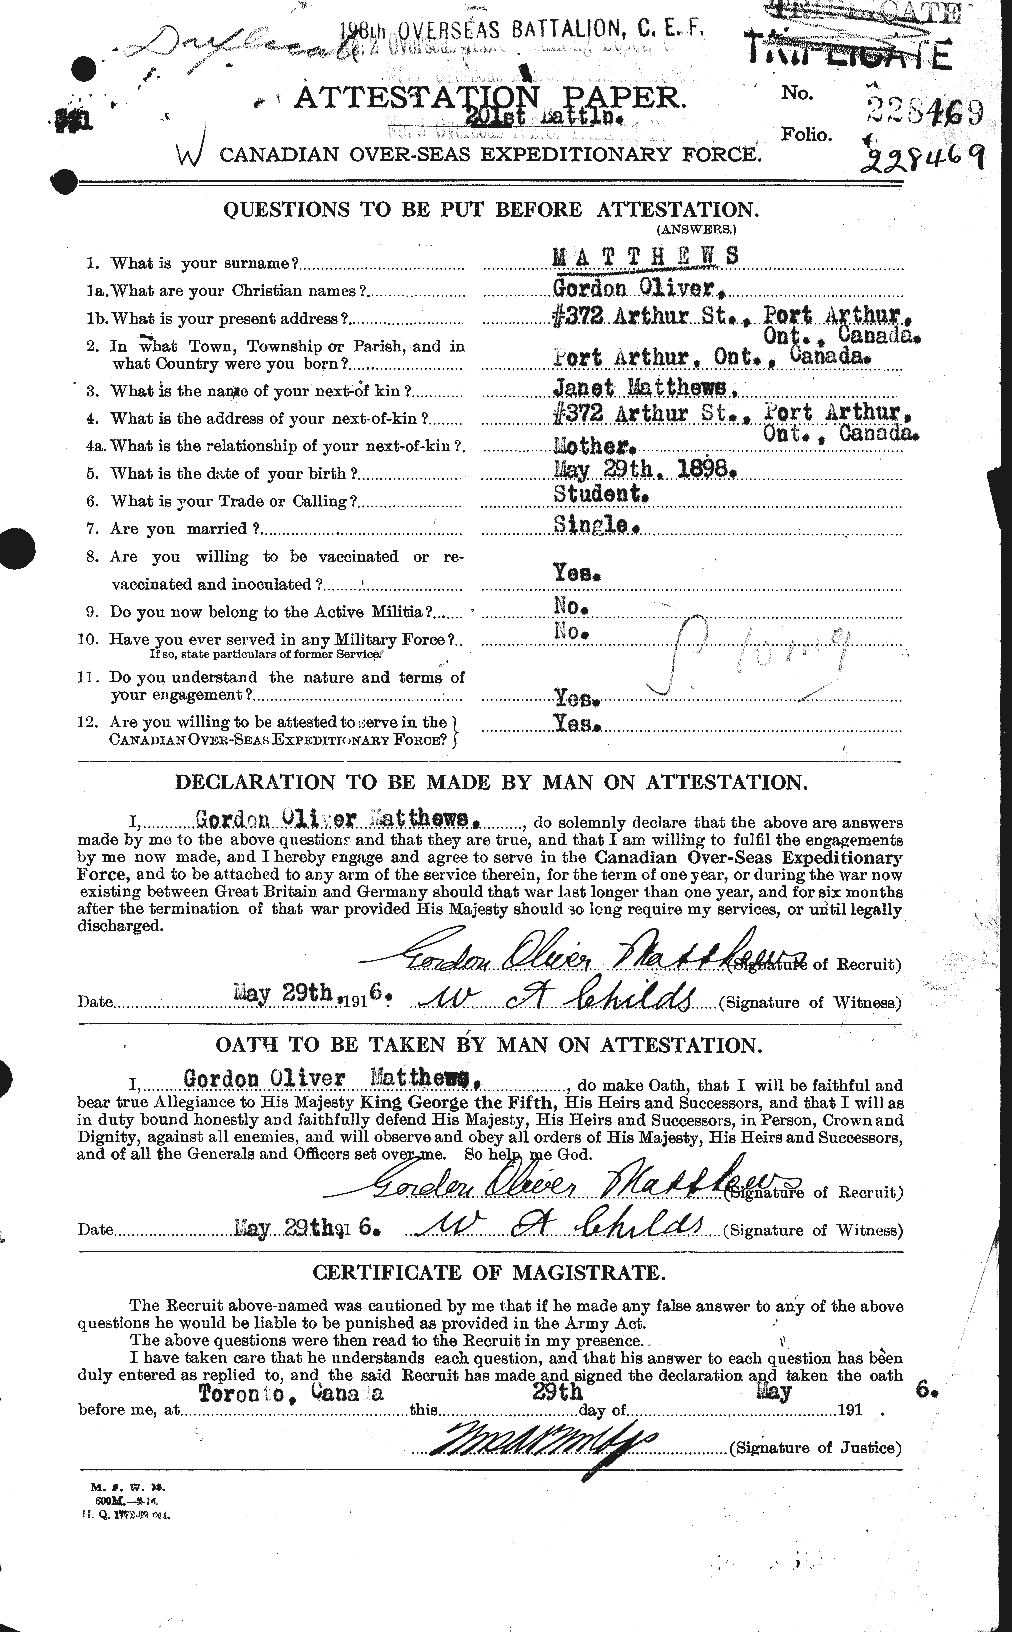 Personnel Records of the First World War - CEF 491140a